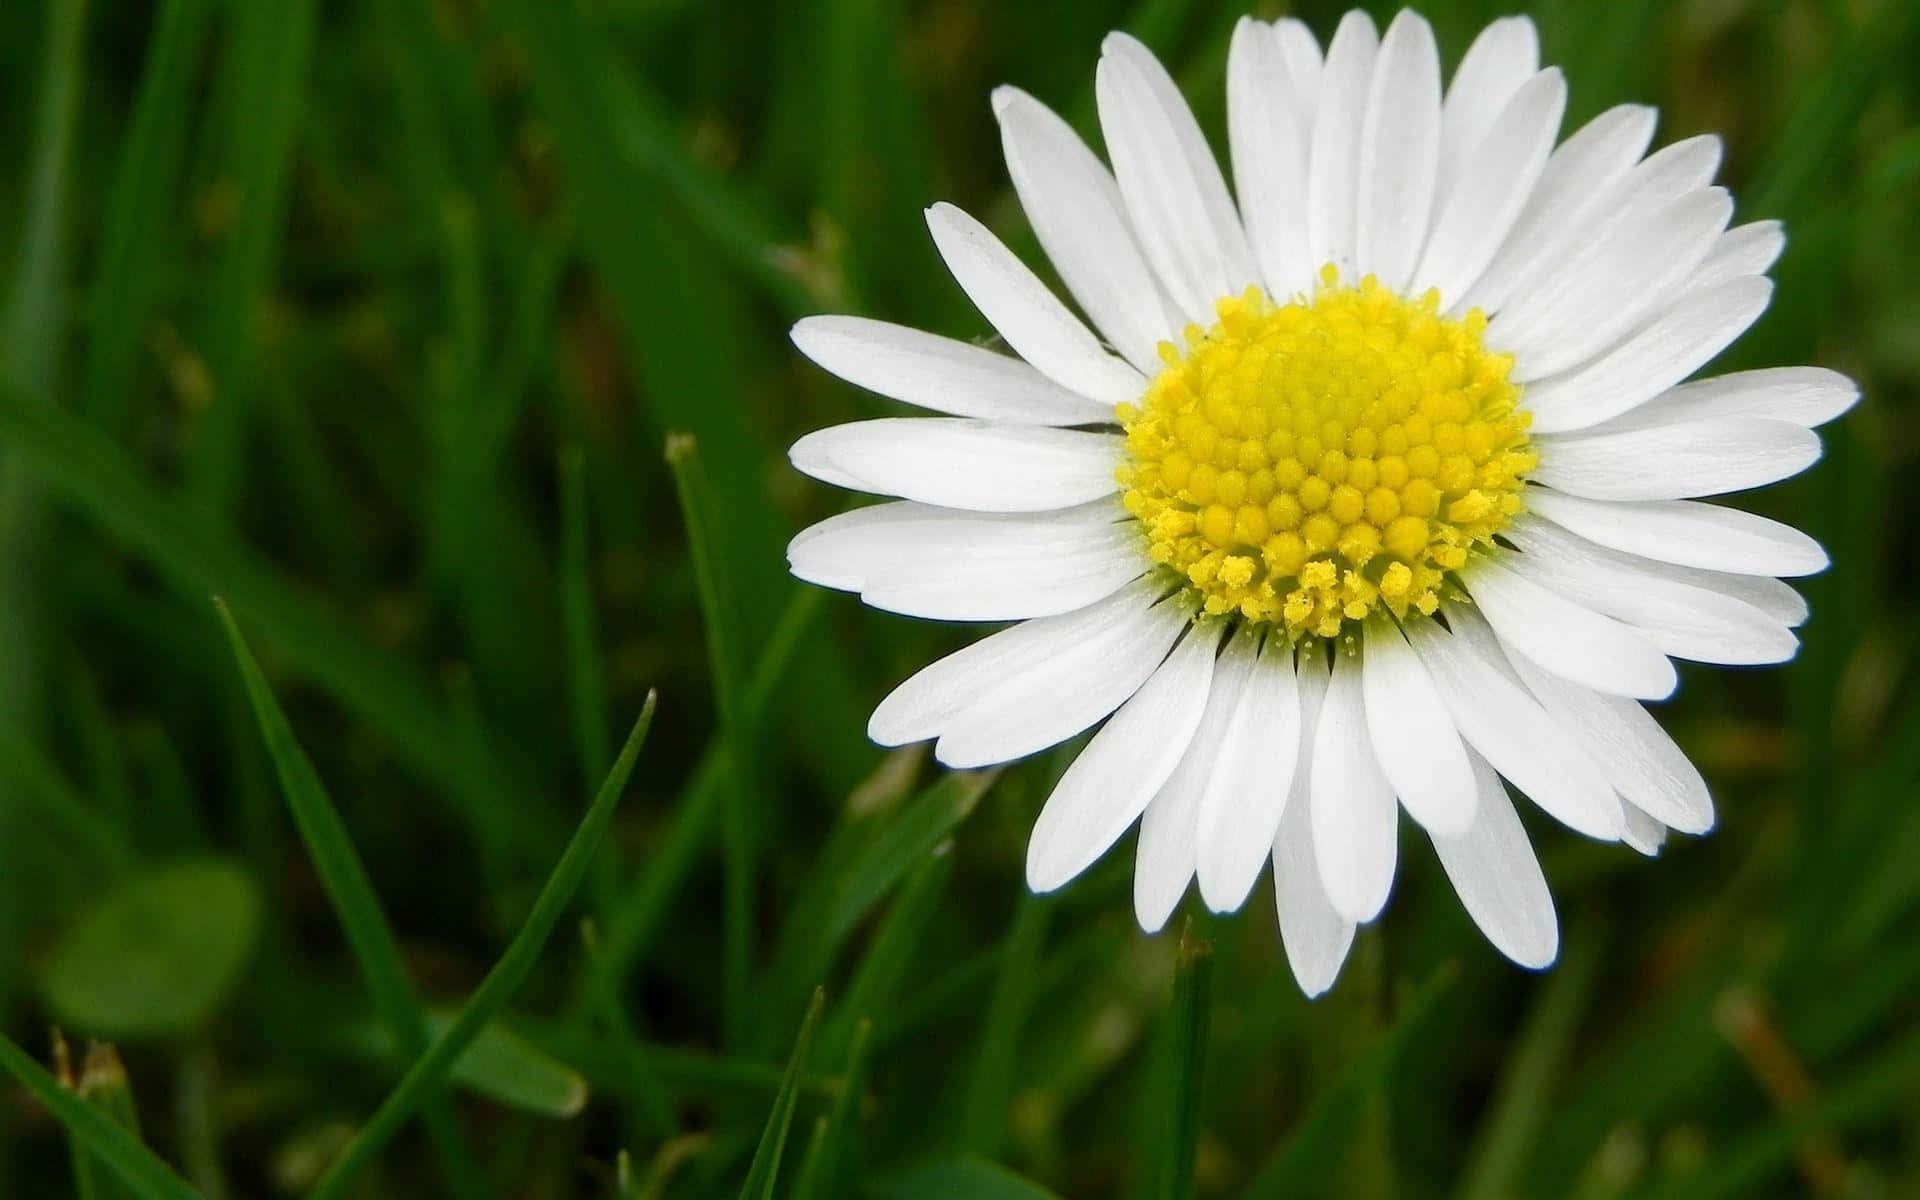 Feel the beauty of the sunshine radiating over the delicate daisy